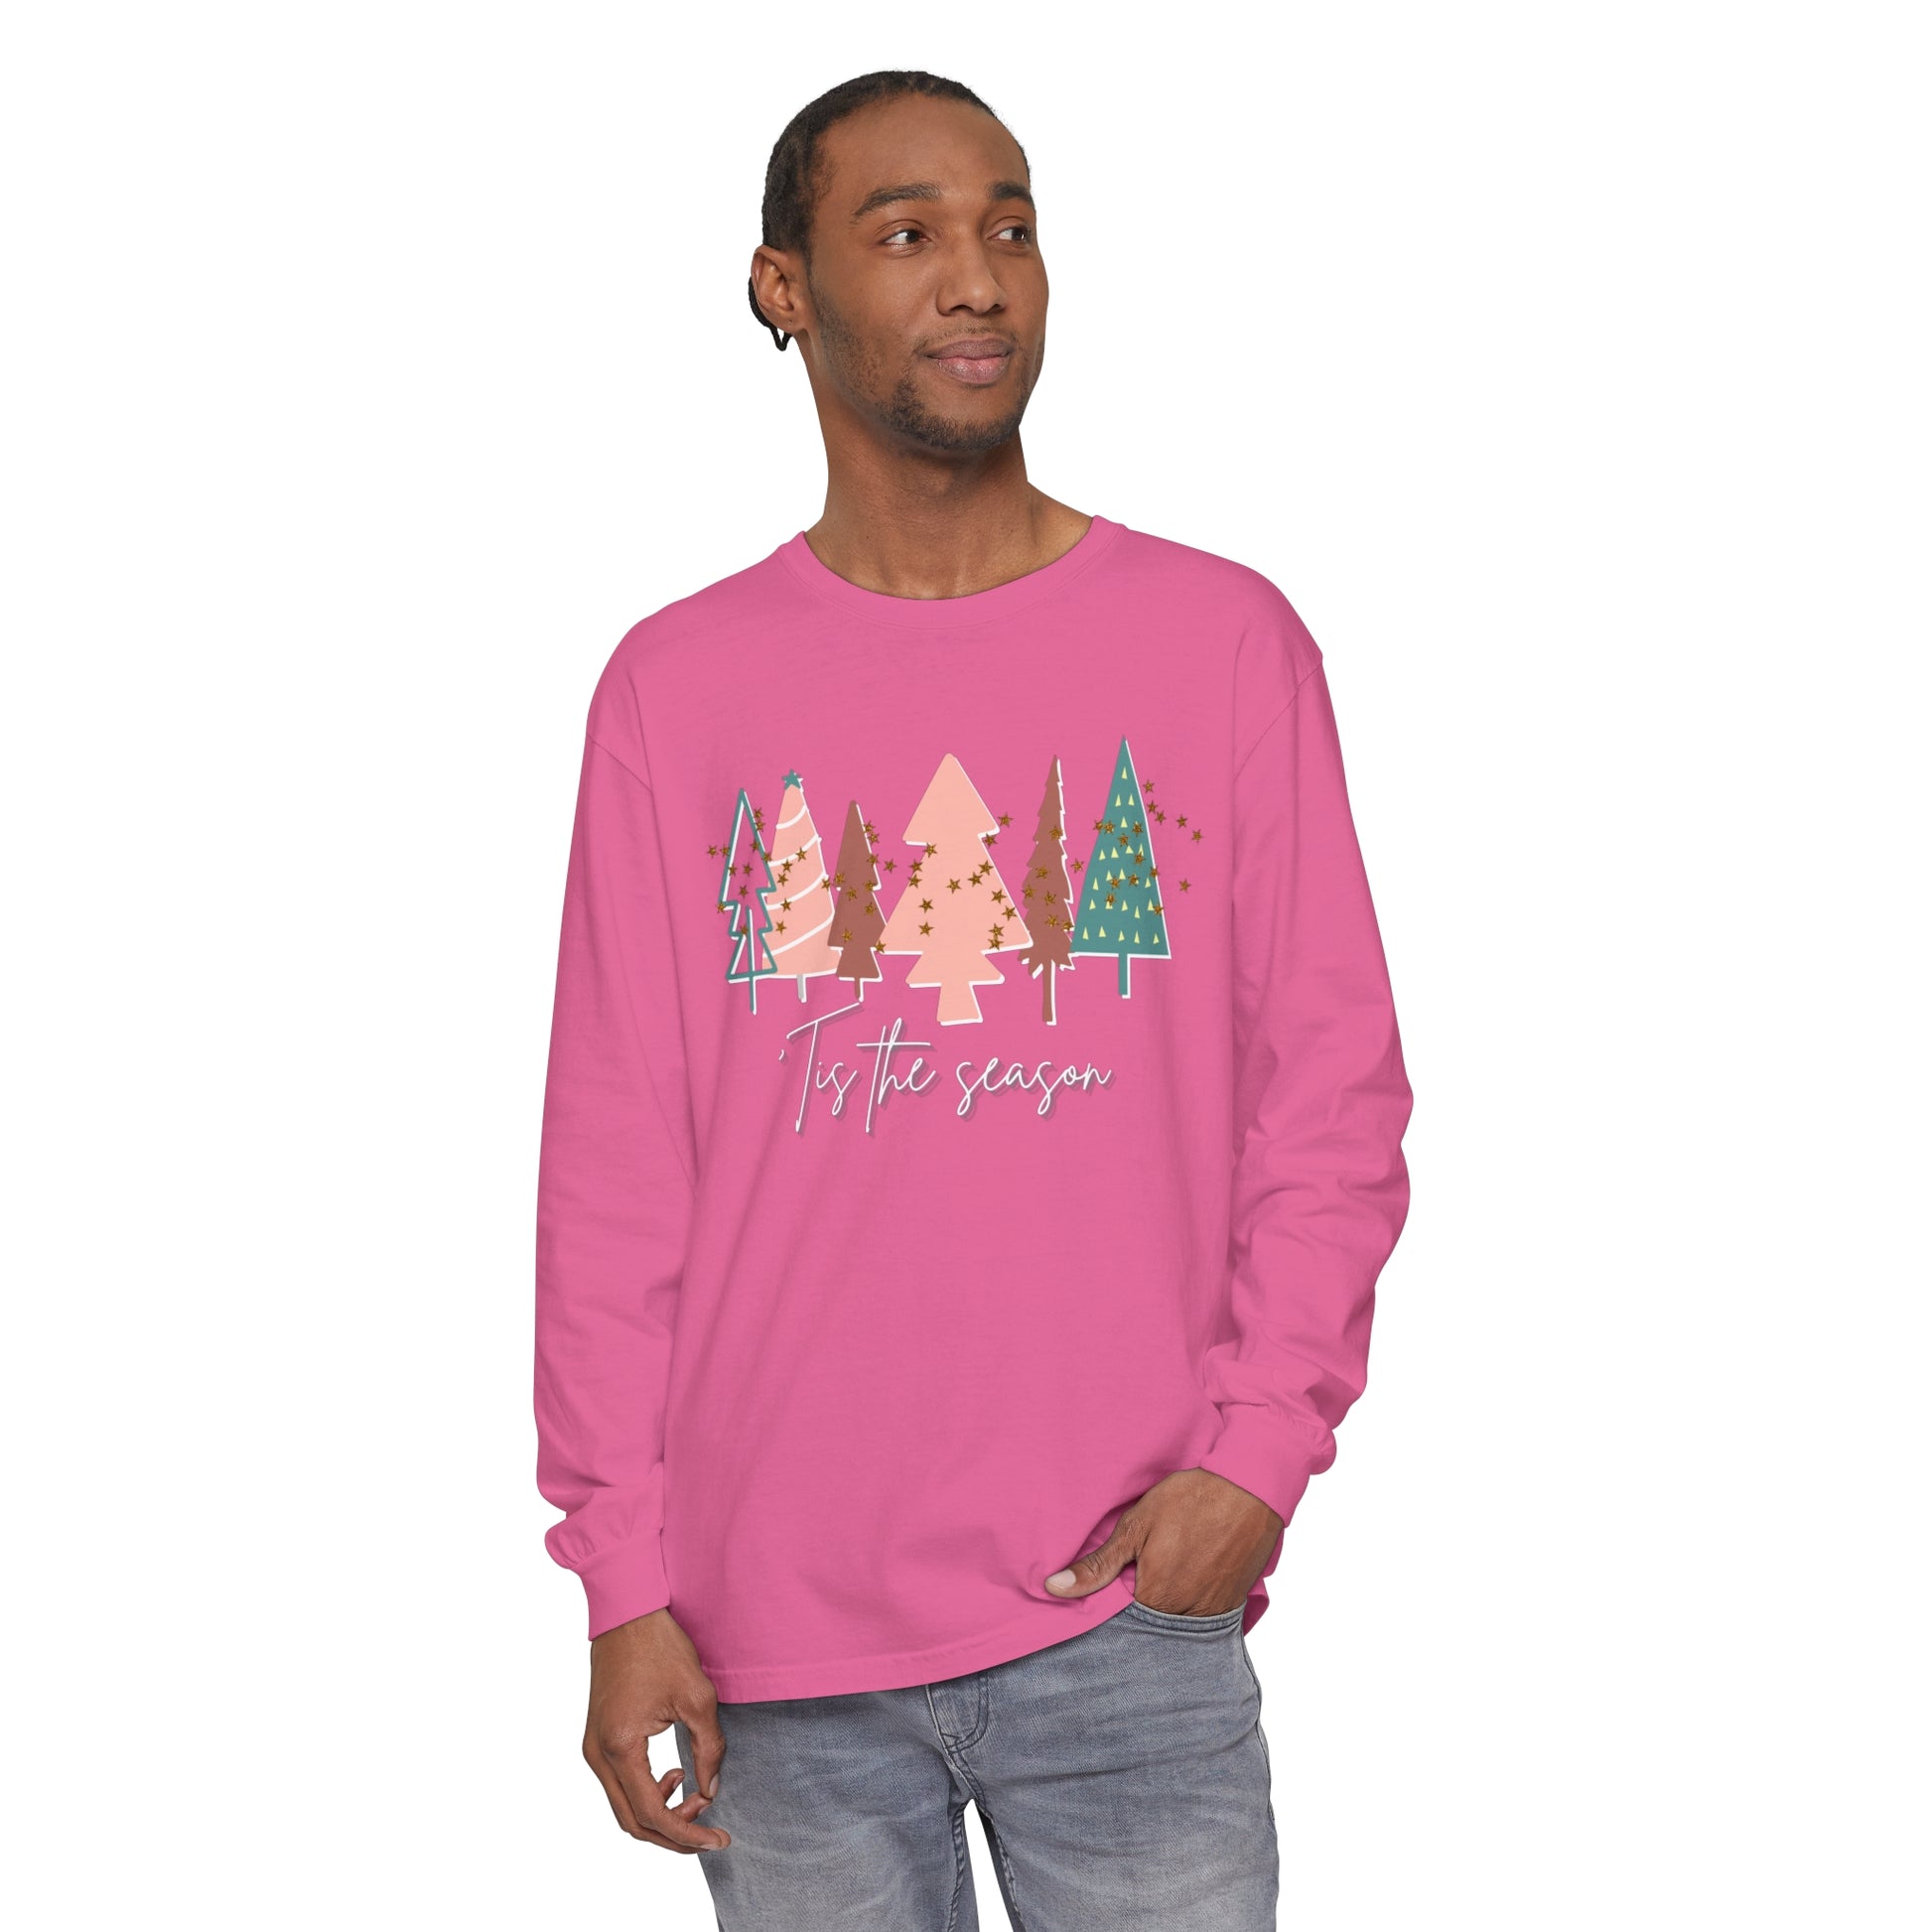 A man wearing a Tis the Season Christmas Tree Shirt by Comfort Colors, blending comfort and style in his winter wardrobe.